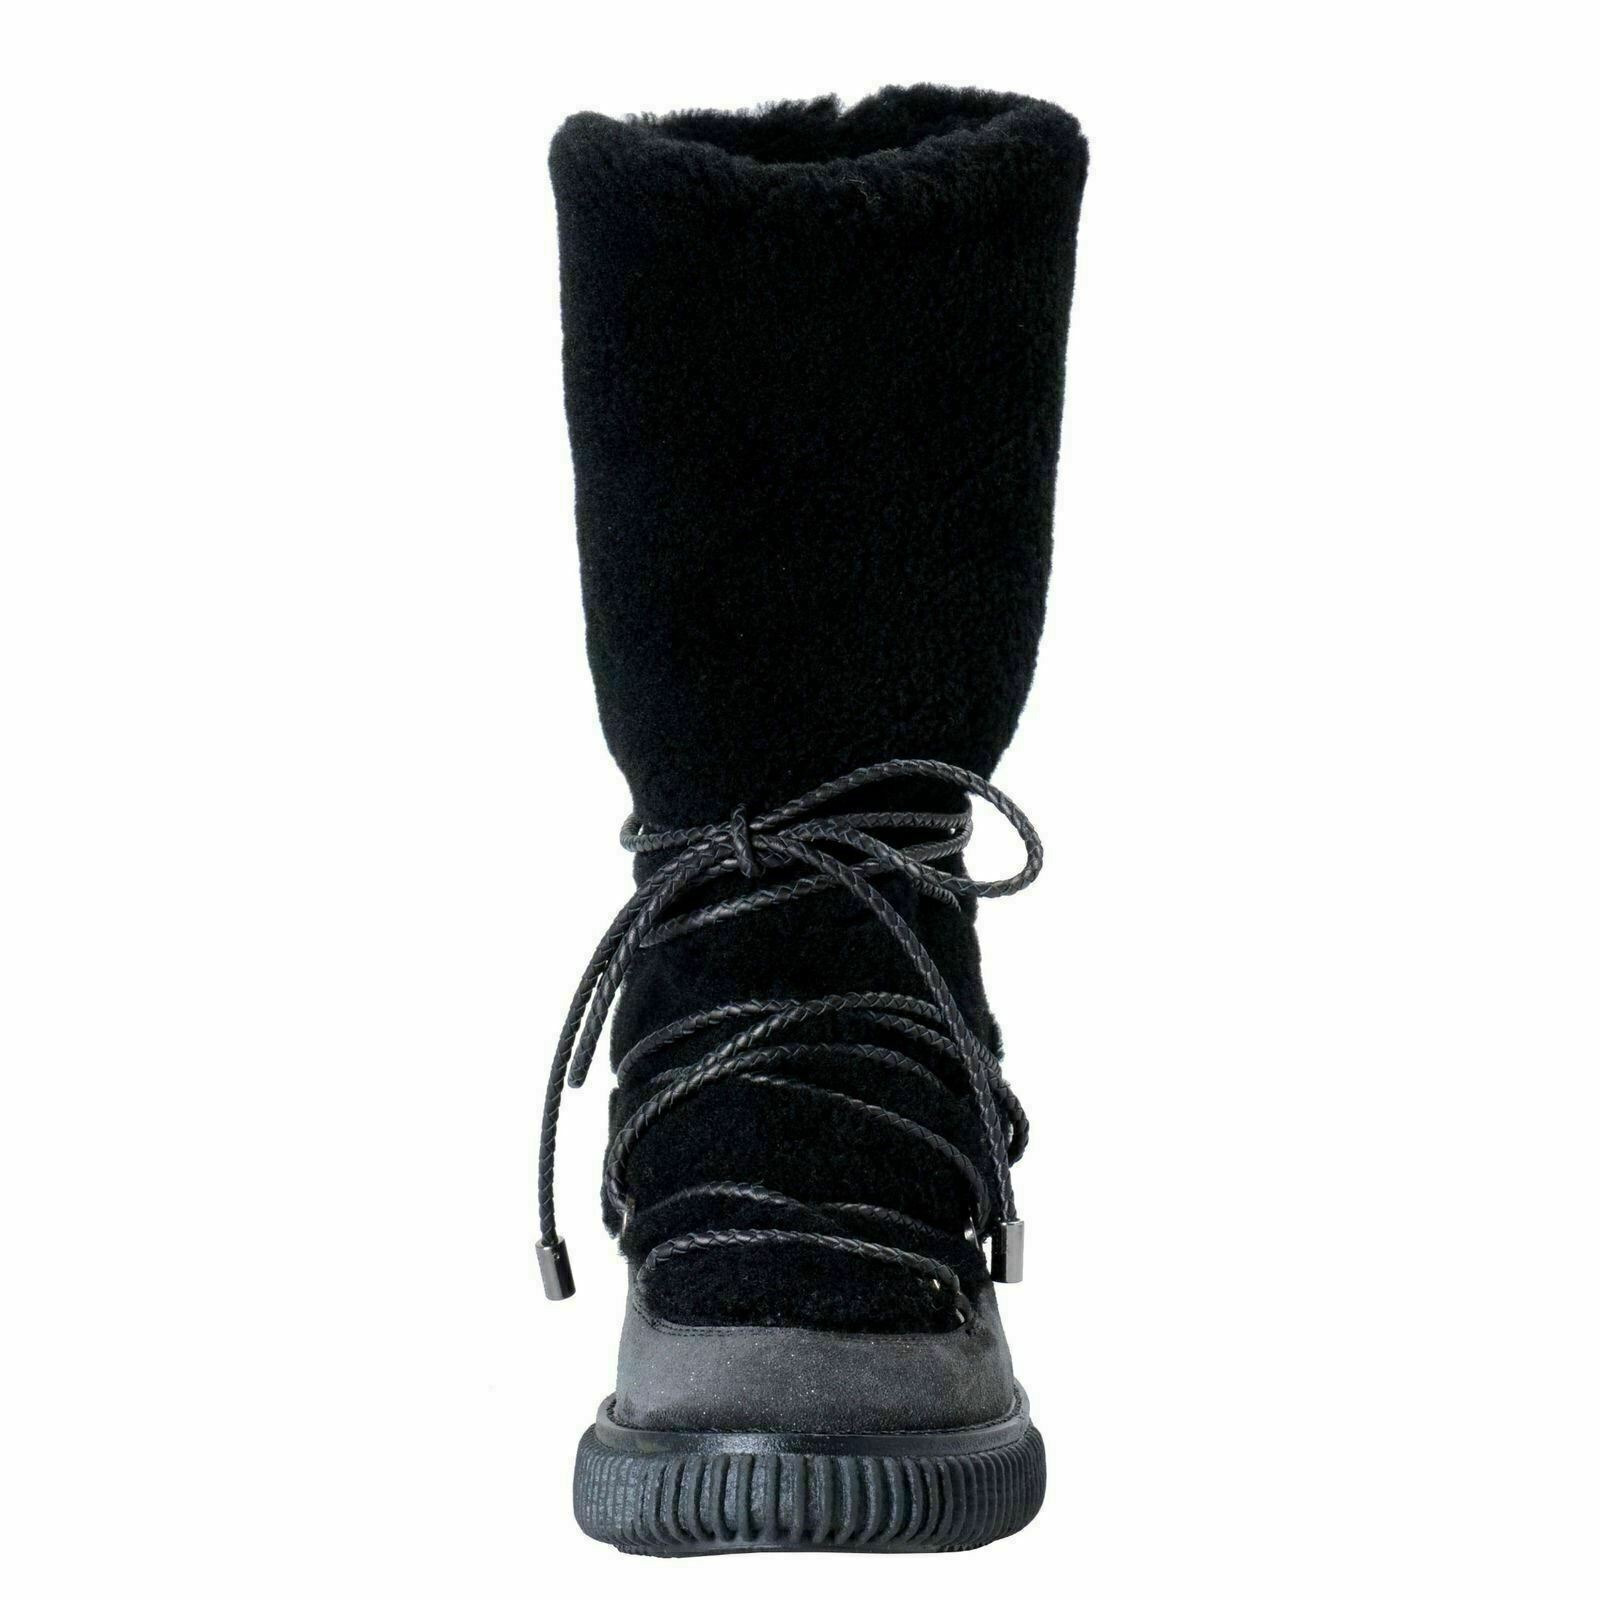 Moncler Women's KATIA Real Fur Leather Winter Boots Shoes US 5 IT 35 | eBay